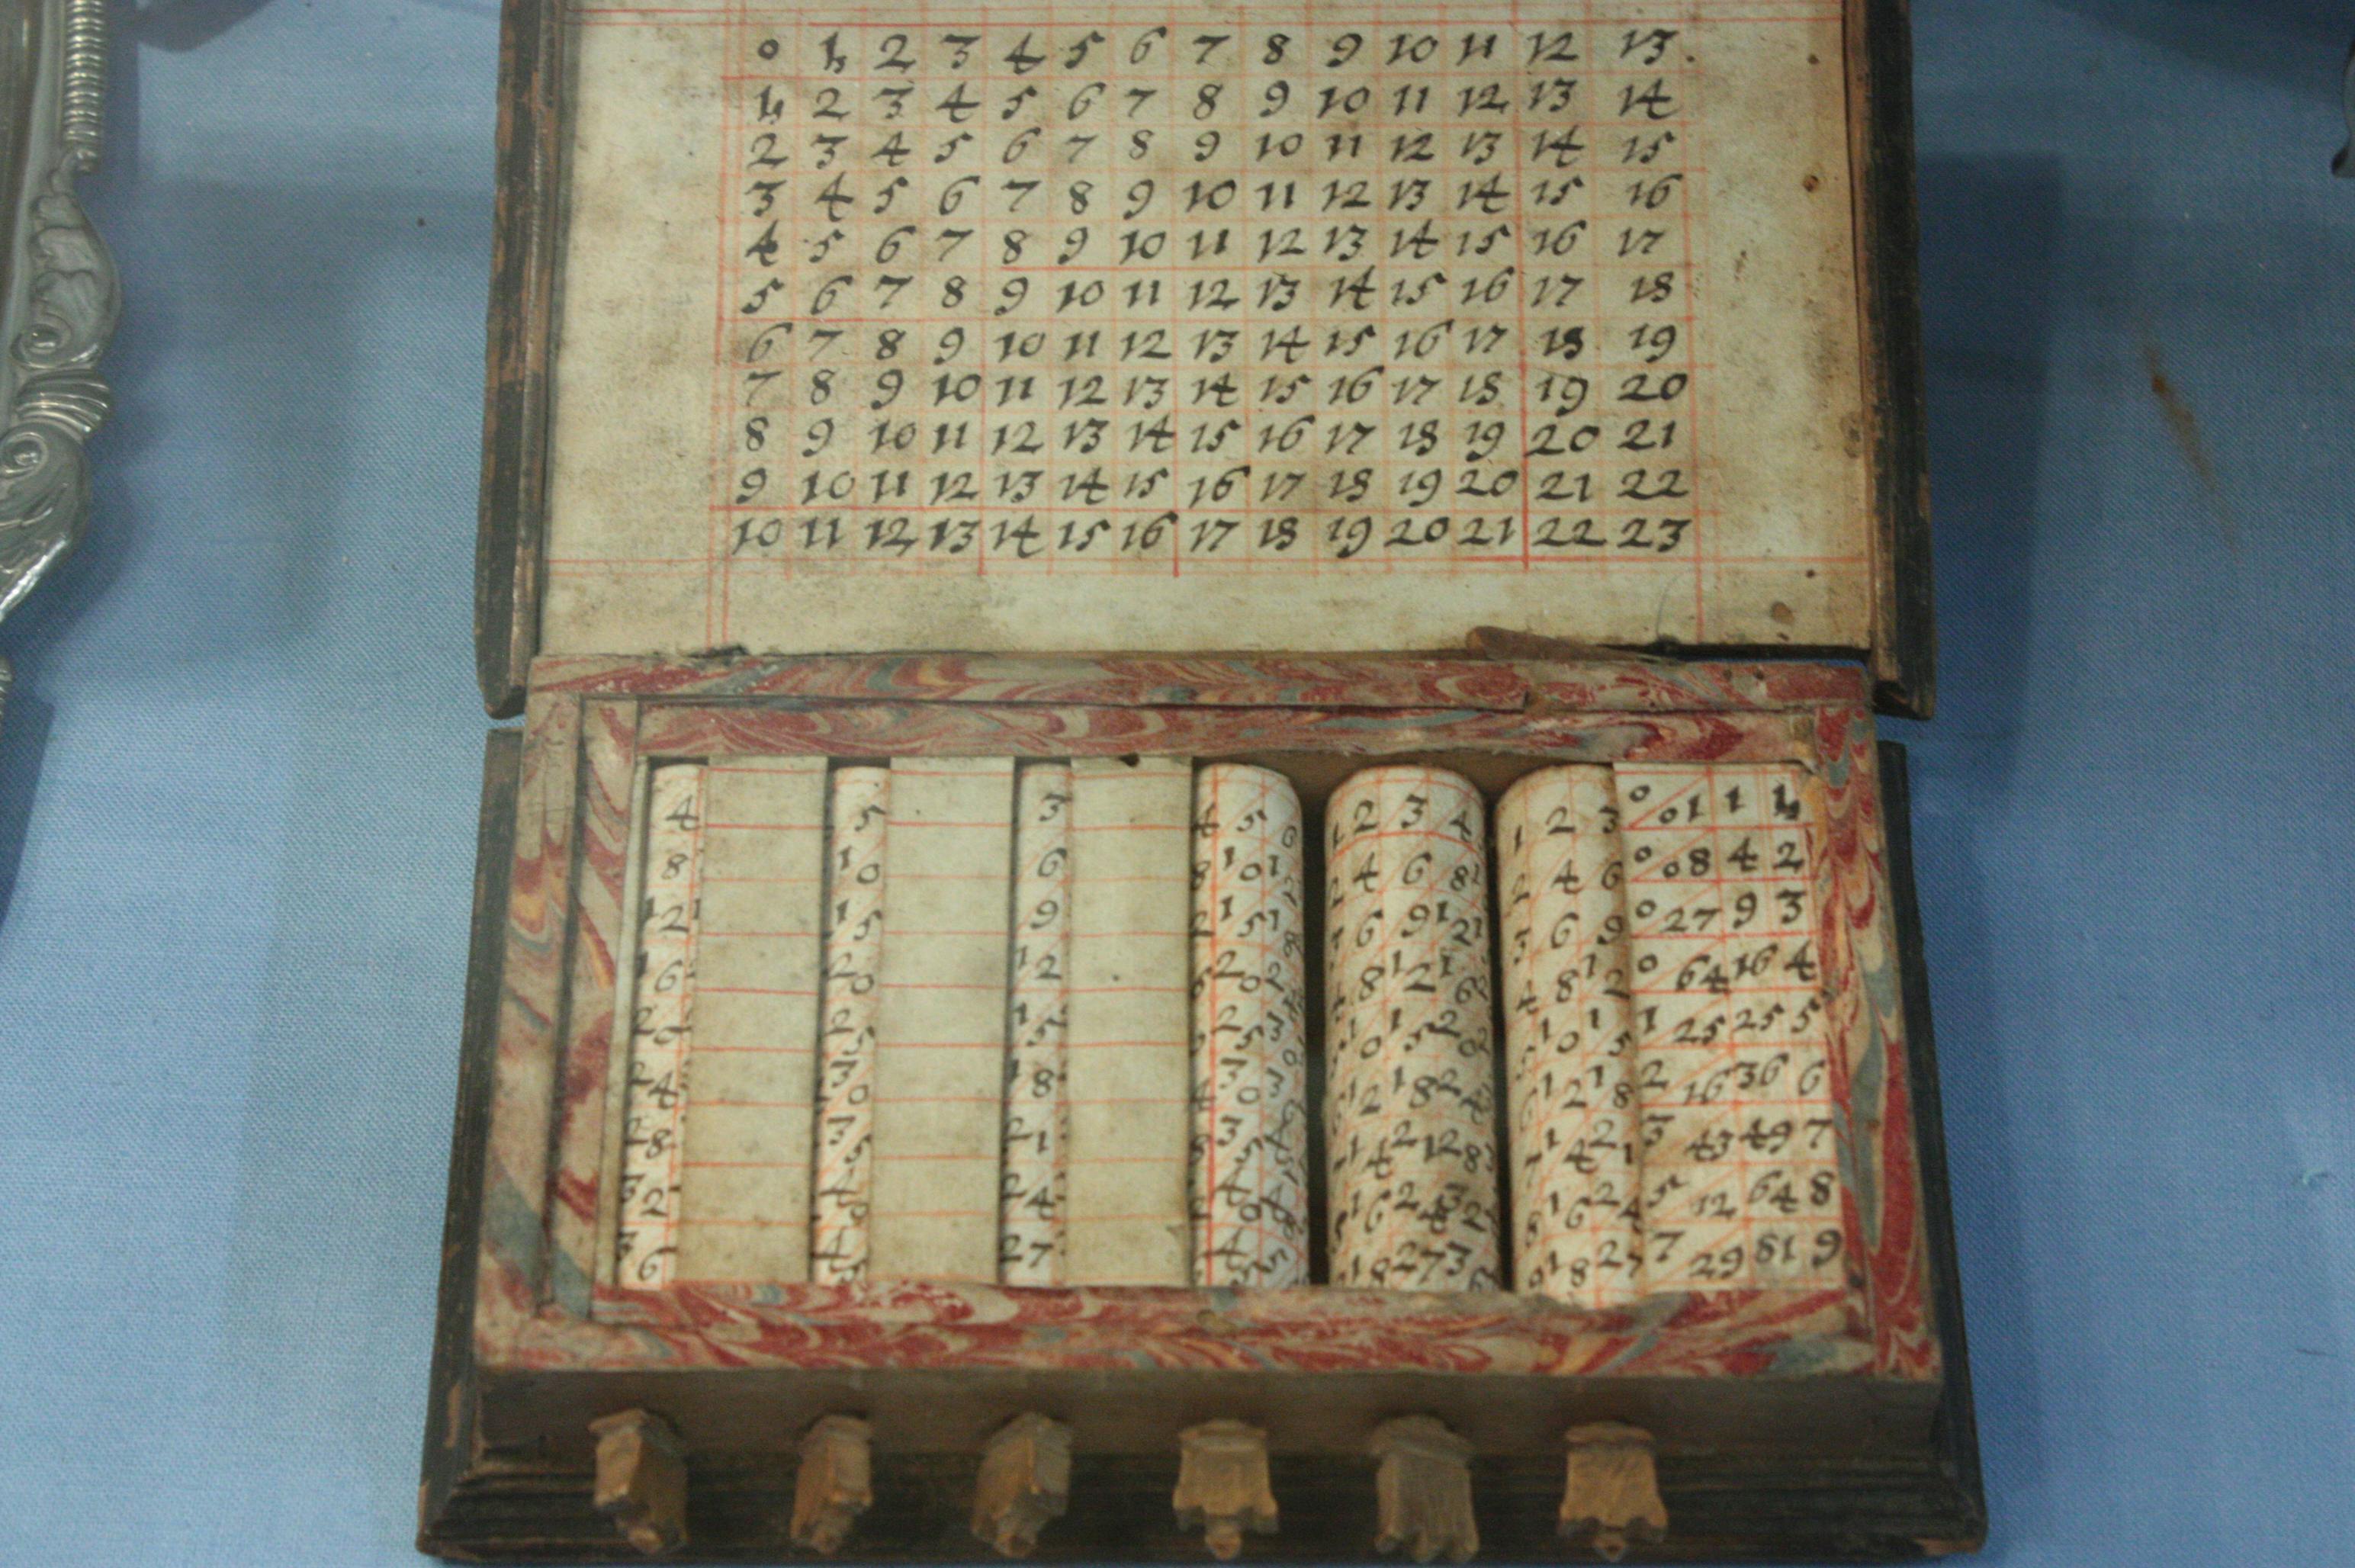 Napier's bones. Using the multiplication tables embedded in the rods, multiplication can be reduced to addition operations and division to subtractions.